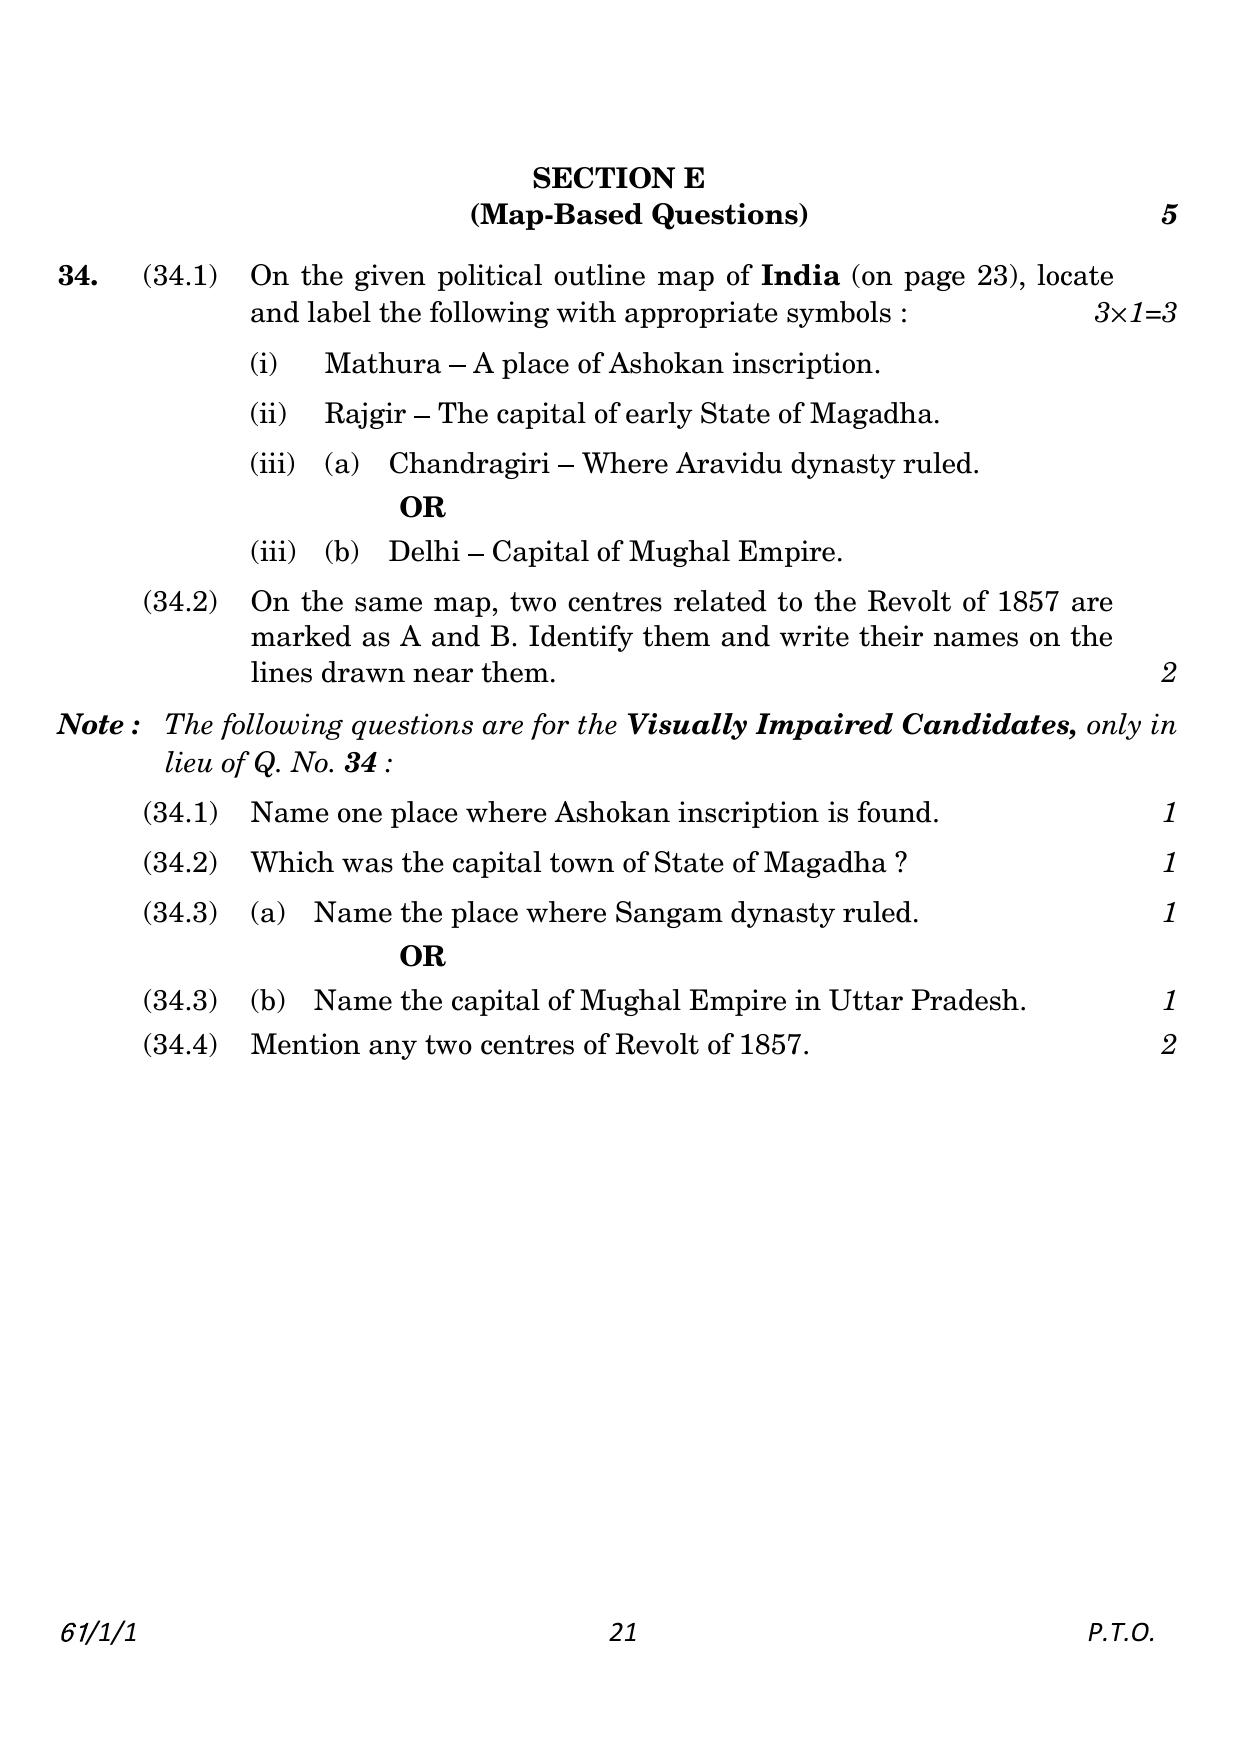 CBSE Class 12 61-1-1 History 2023 Question Paper - Page 21